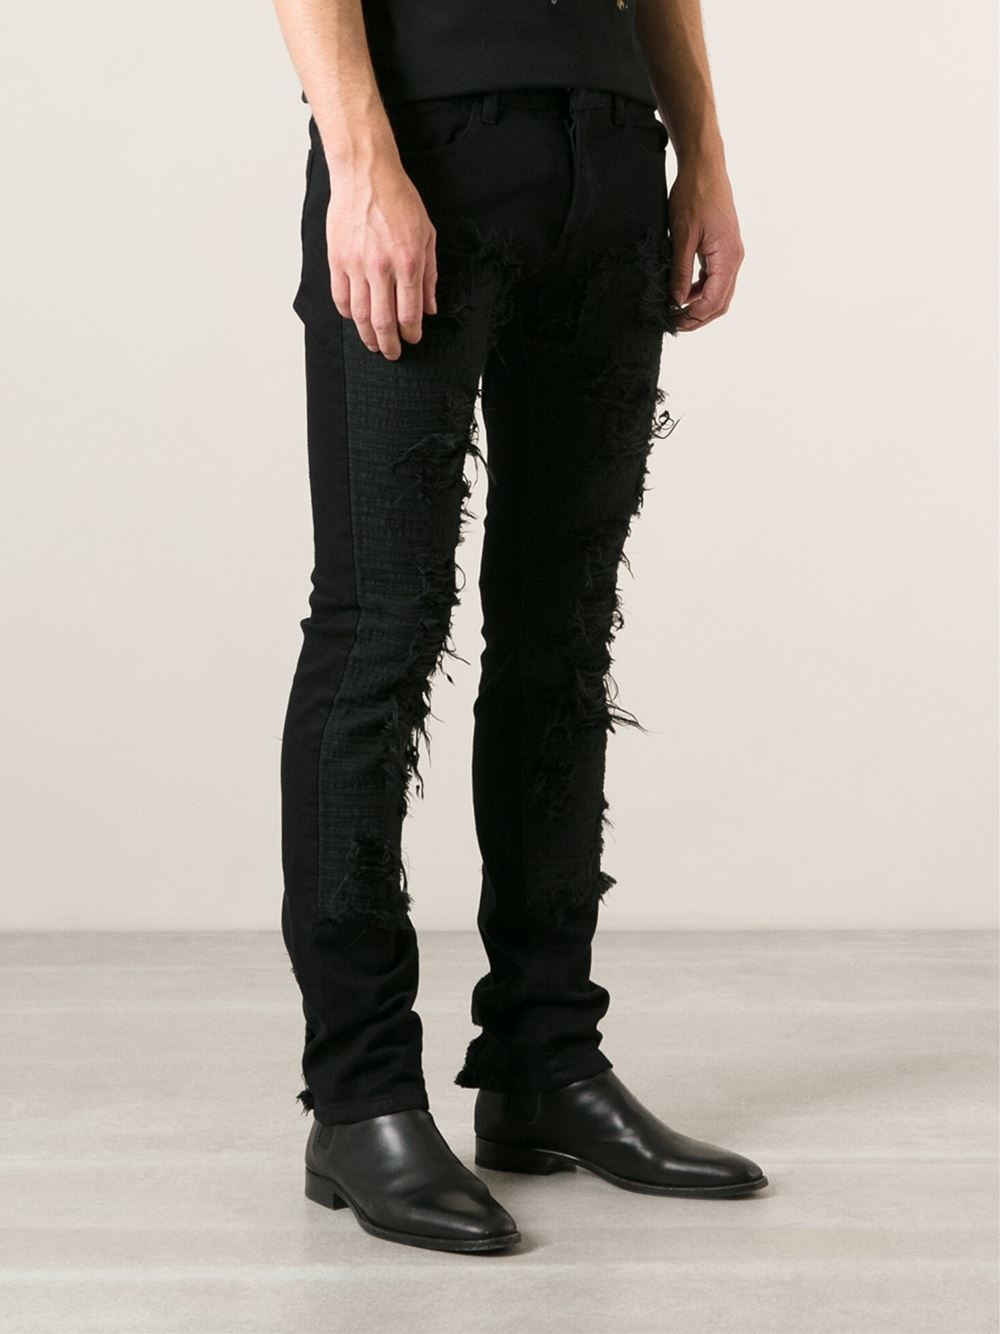 Lyst - Roberto Cavalli Ripped Slim Fit Jeans in Black for Men